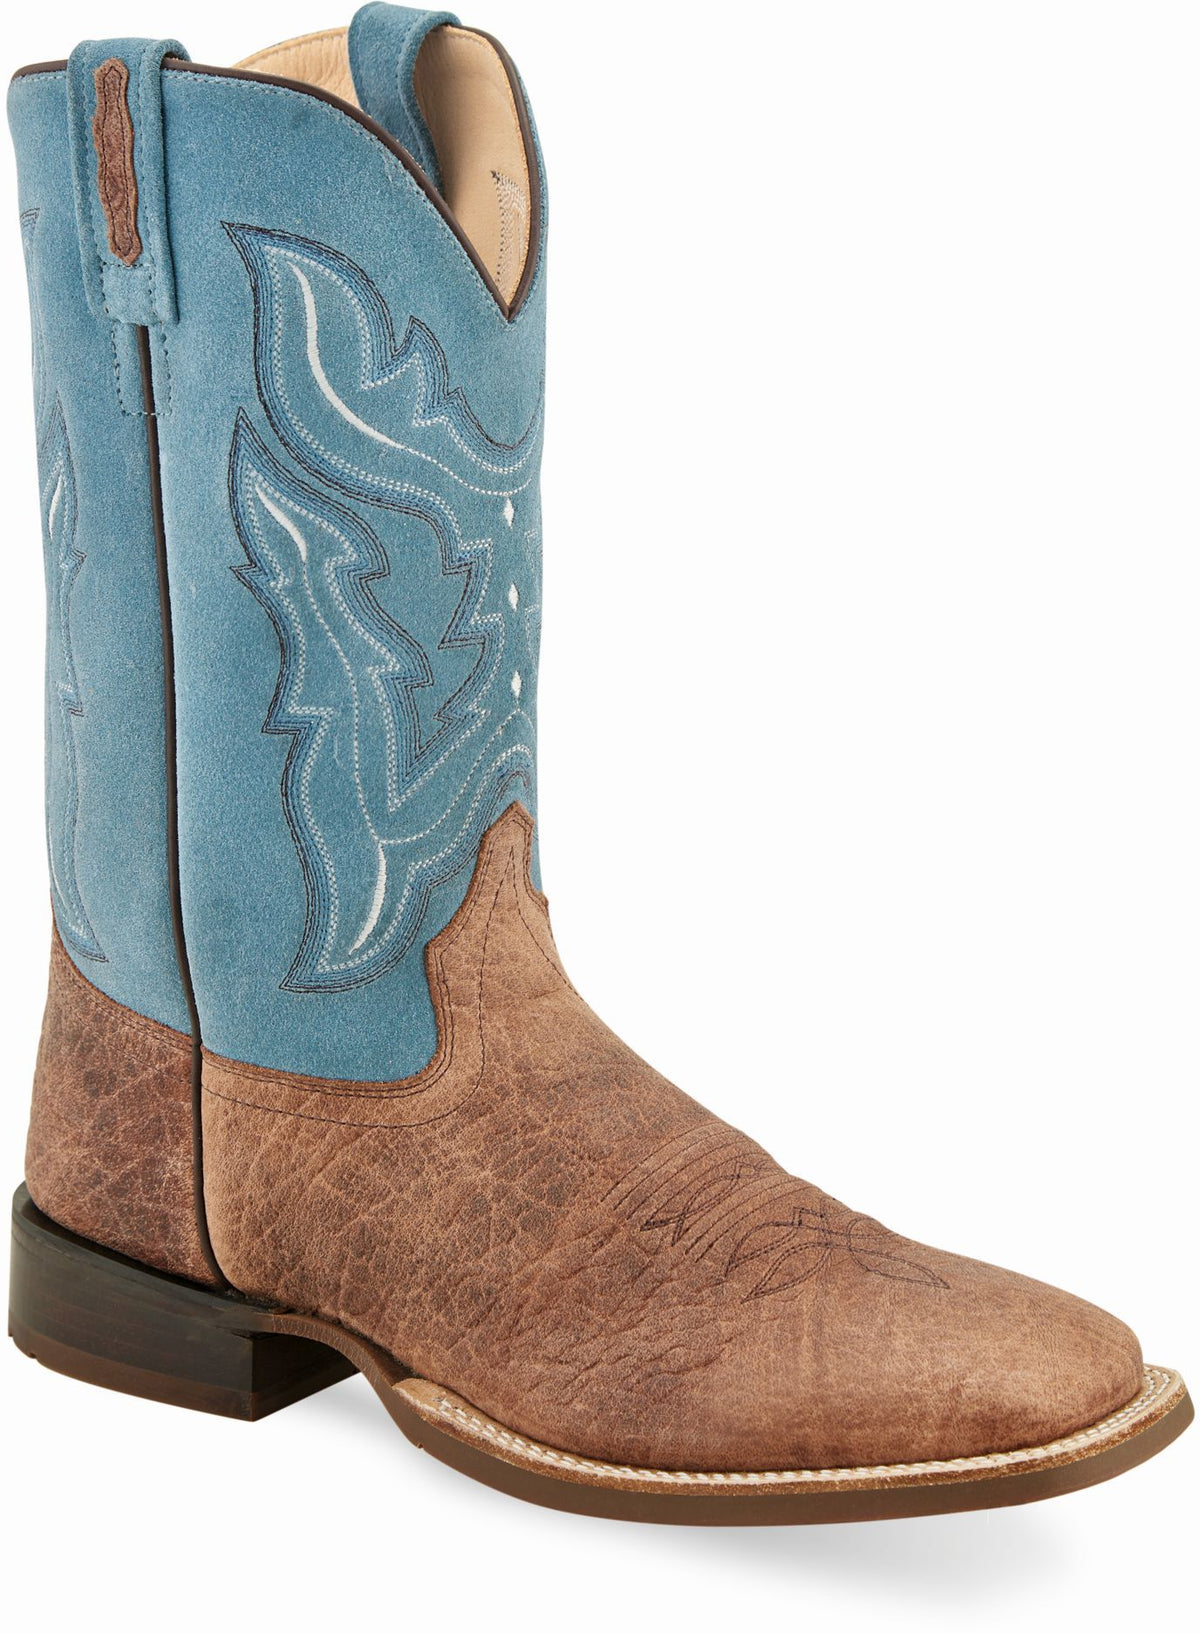 Old West Brown Bull Hide Print Foot Sky Blue Suede Shaft Men's Broad Square Toe Boots